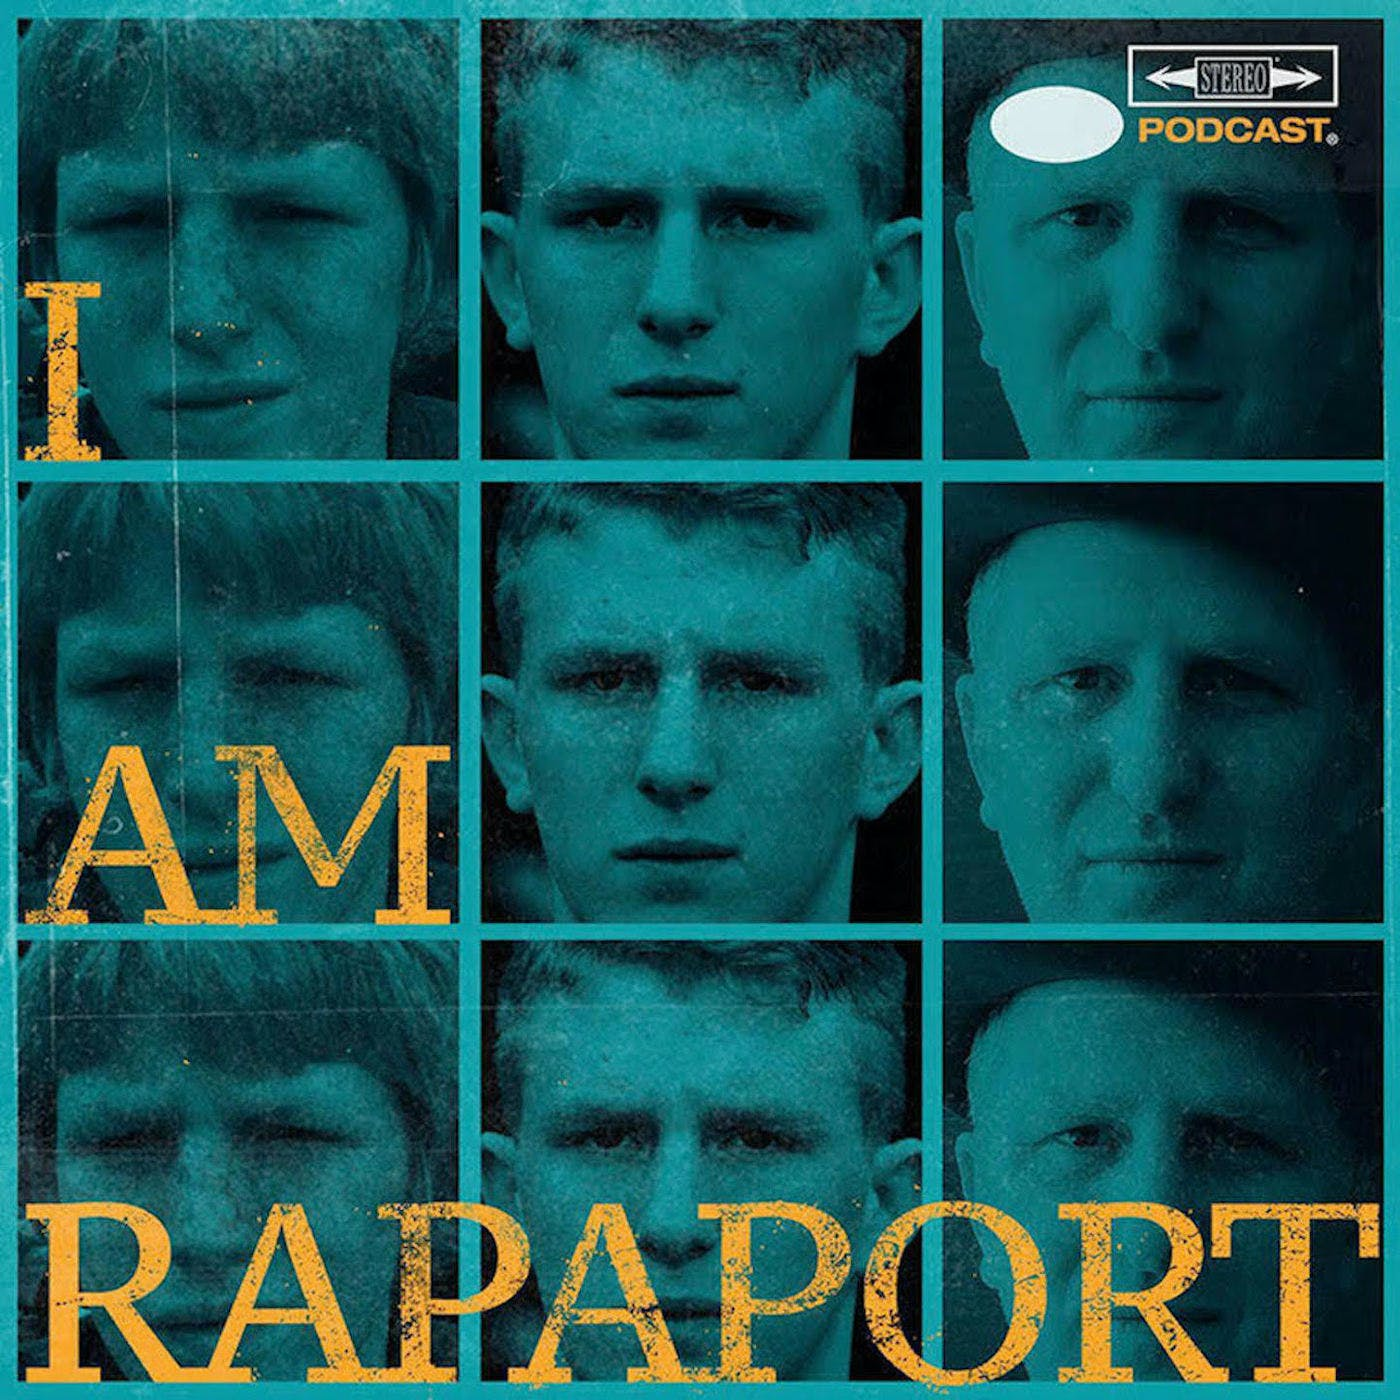 EP 159 - I AM RAPAPORT DIRTY SPORTS: STEREO PODCAST CROSSOVER LIVE FROM THE HOLLYWOOD IMPROV IN LOS ANGELES, CA